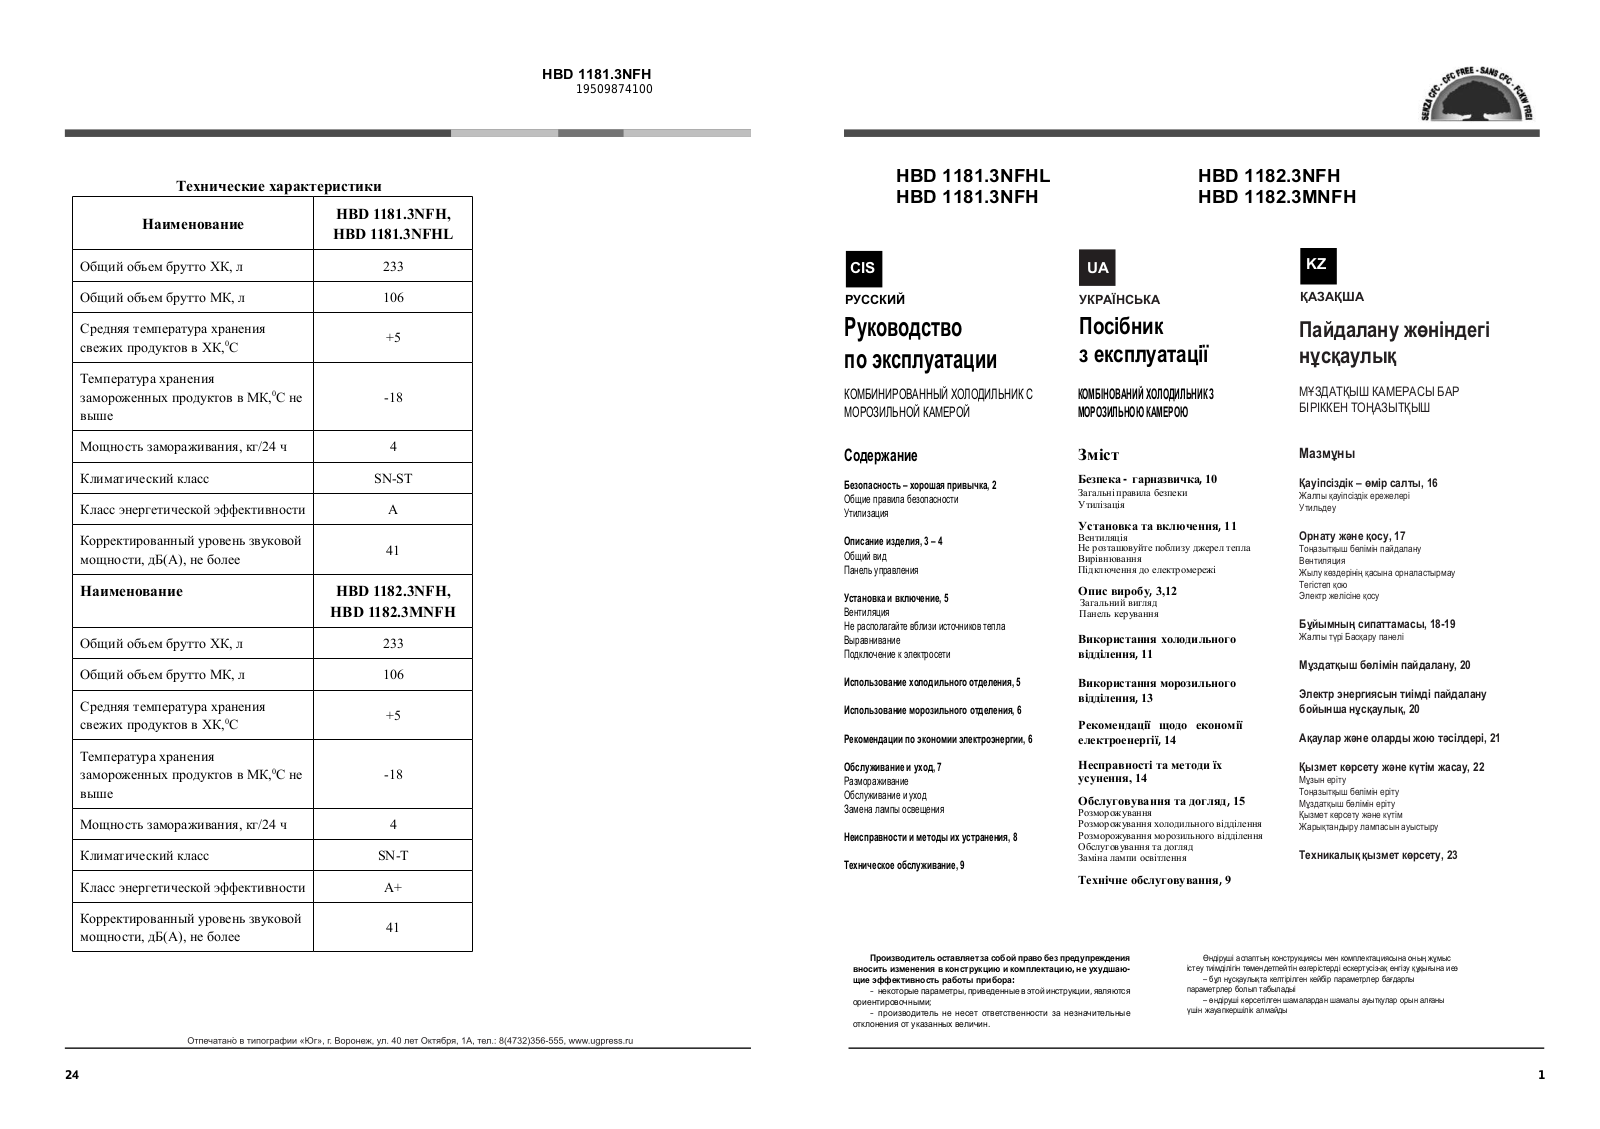 Hotpoint-Ariston HBD 1182.3 NF H User manual